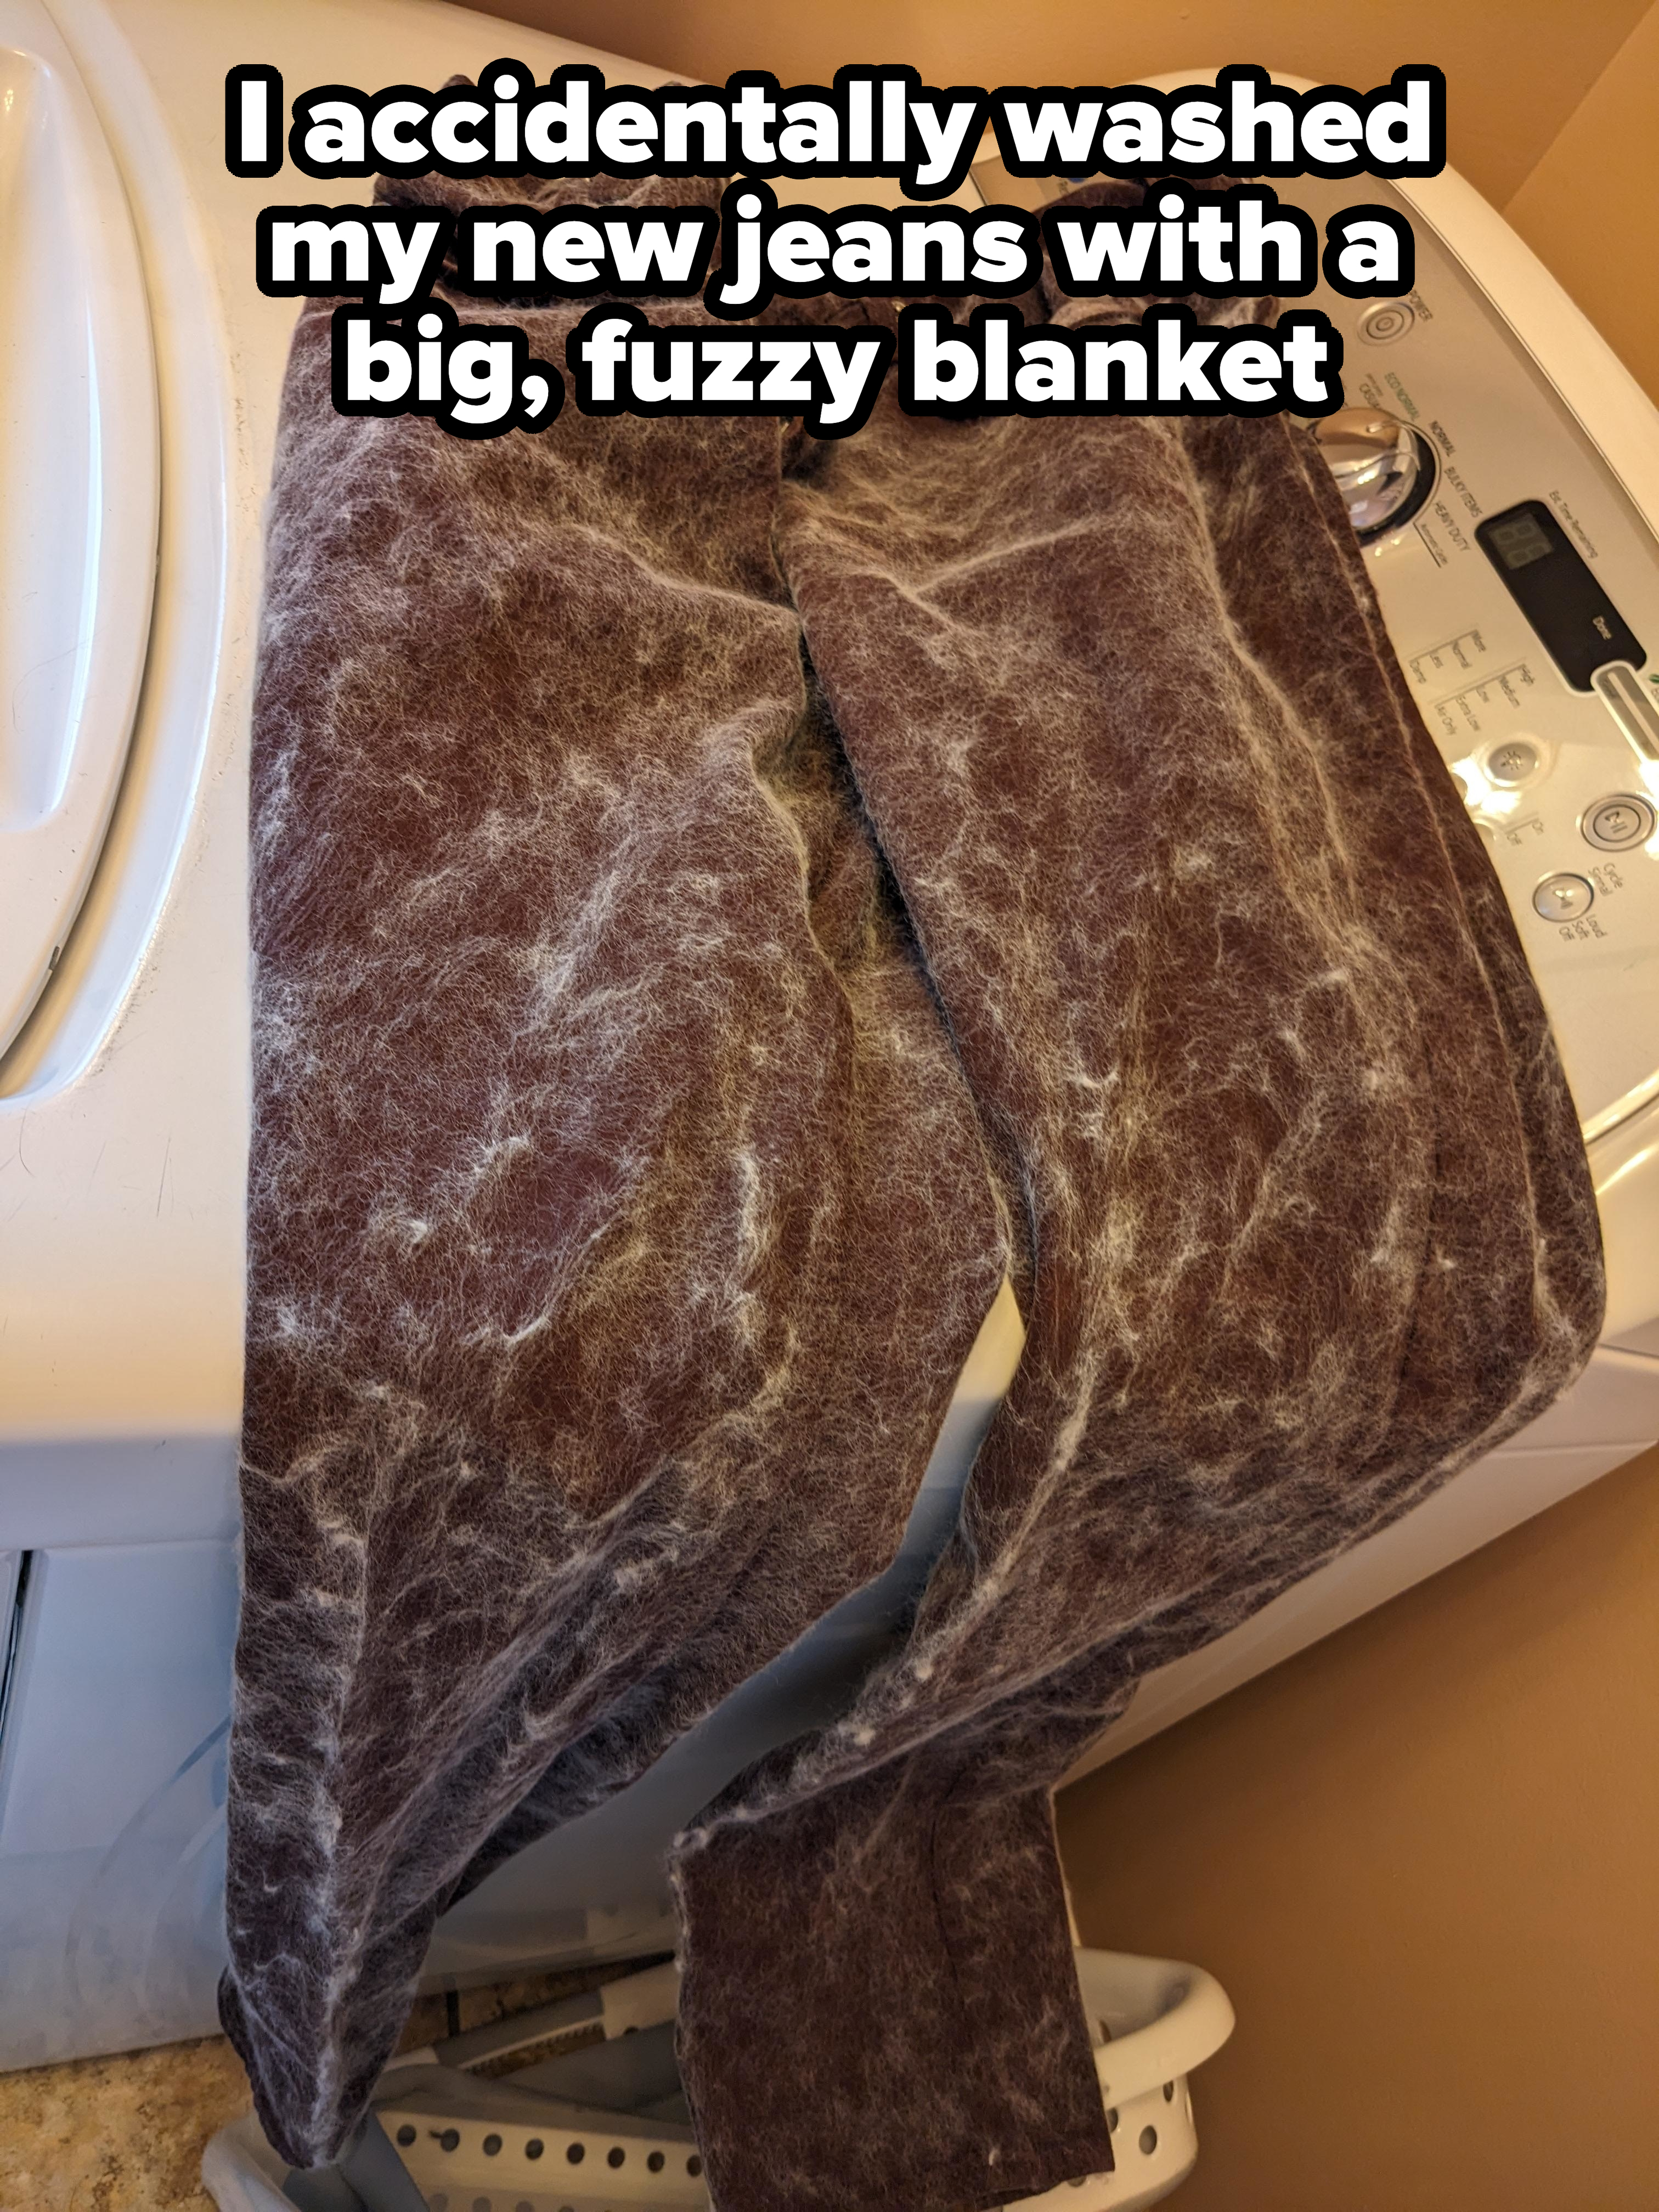 A pair of heavily lint-covered pants on a washing machine